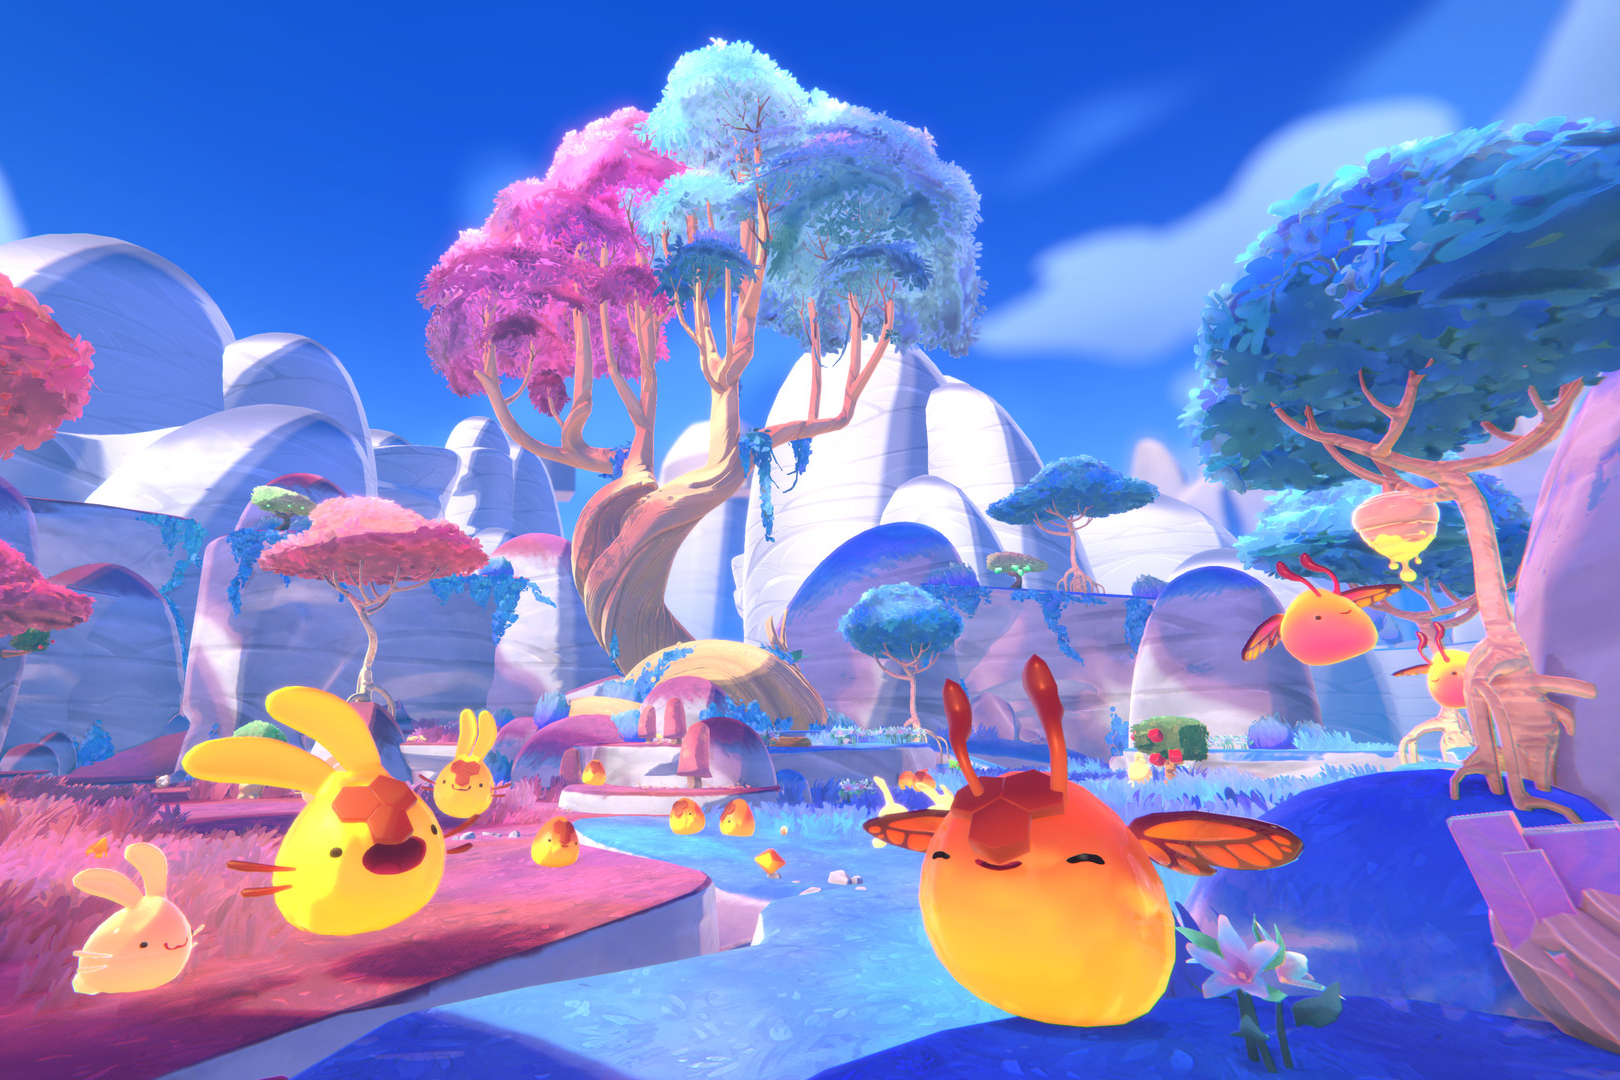 Slimes happily bounce around in the wild in Slime Rancher 2